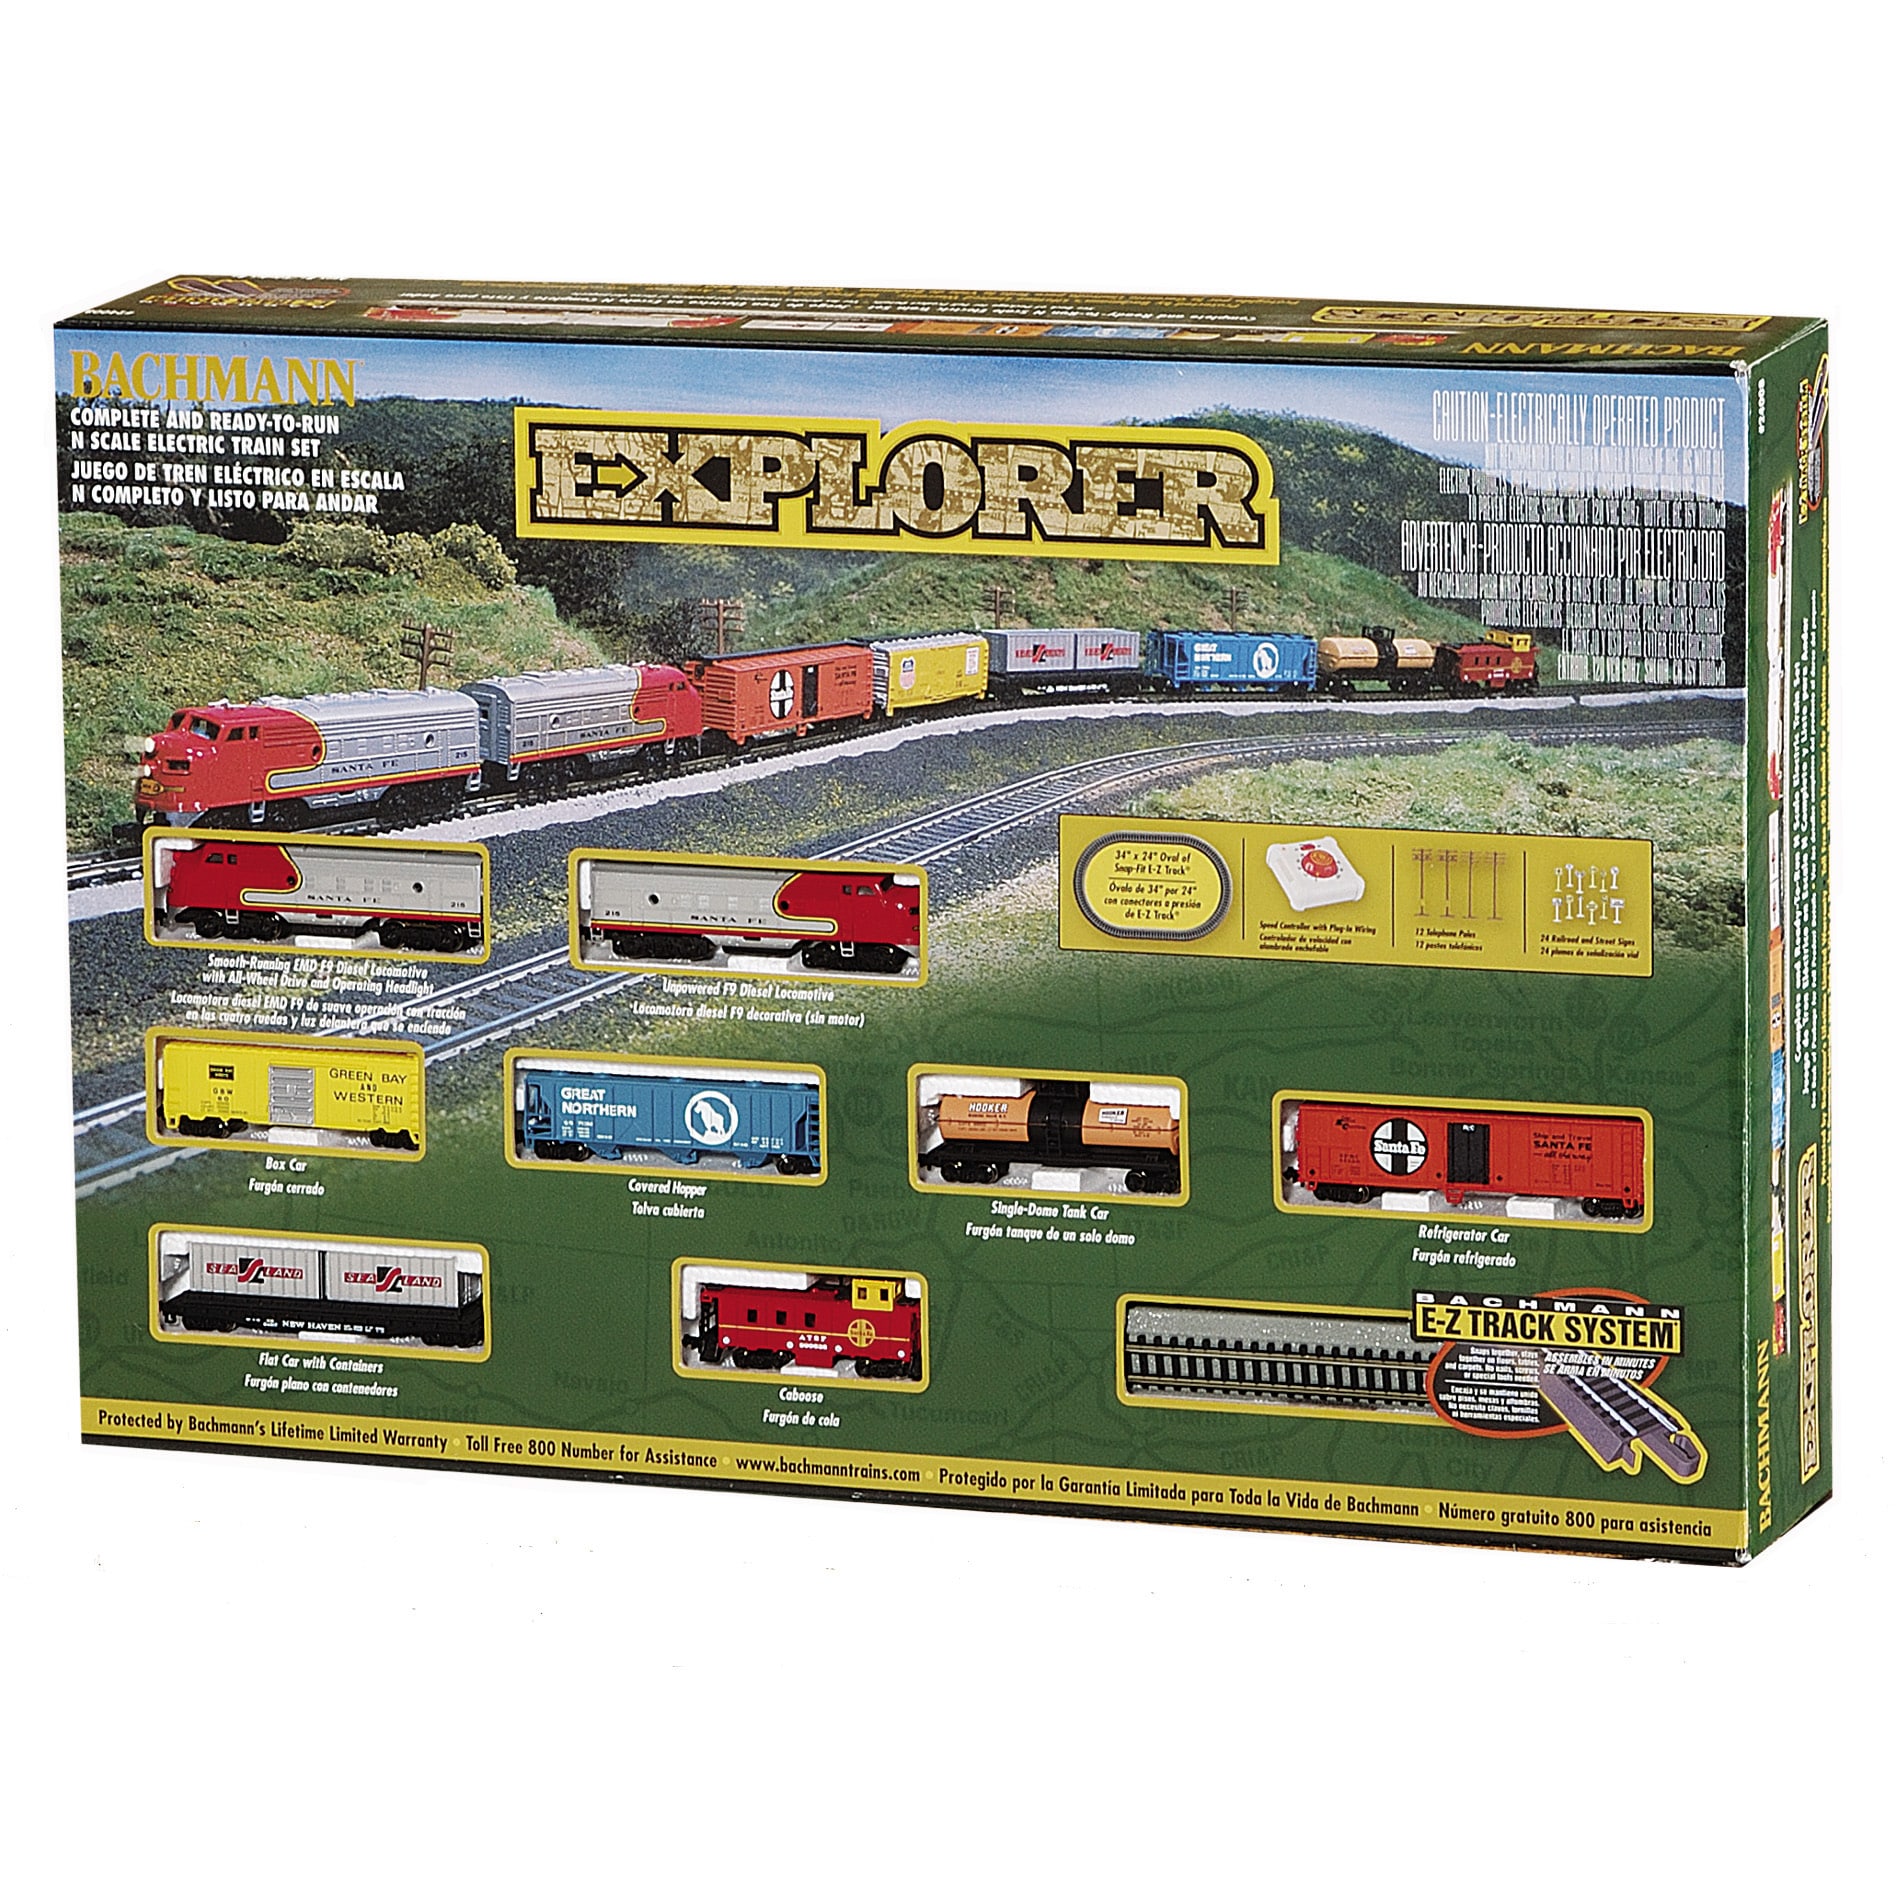 Bachmann N Scale Explorer Train Set - Free Shipping Today - Overstock 